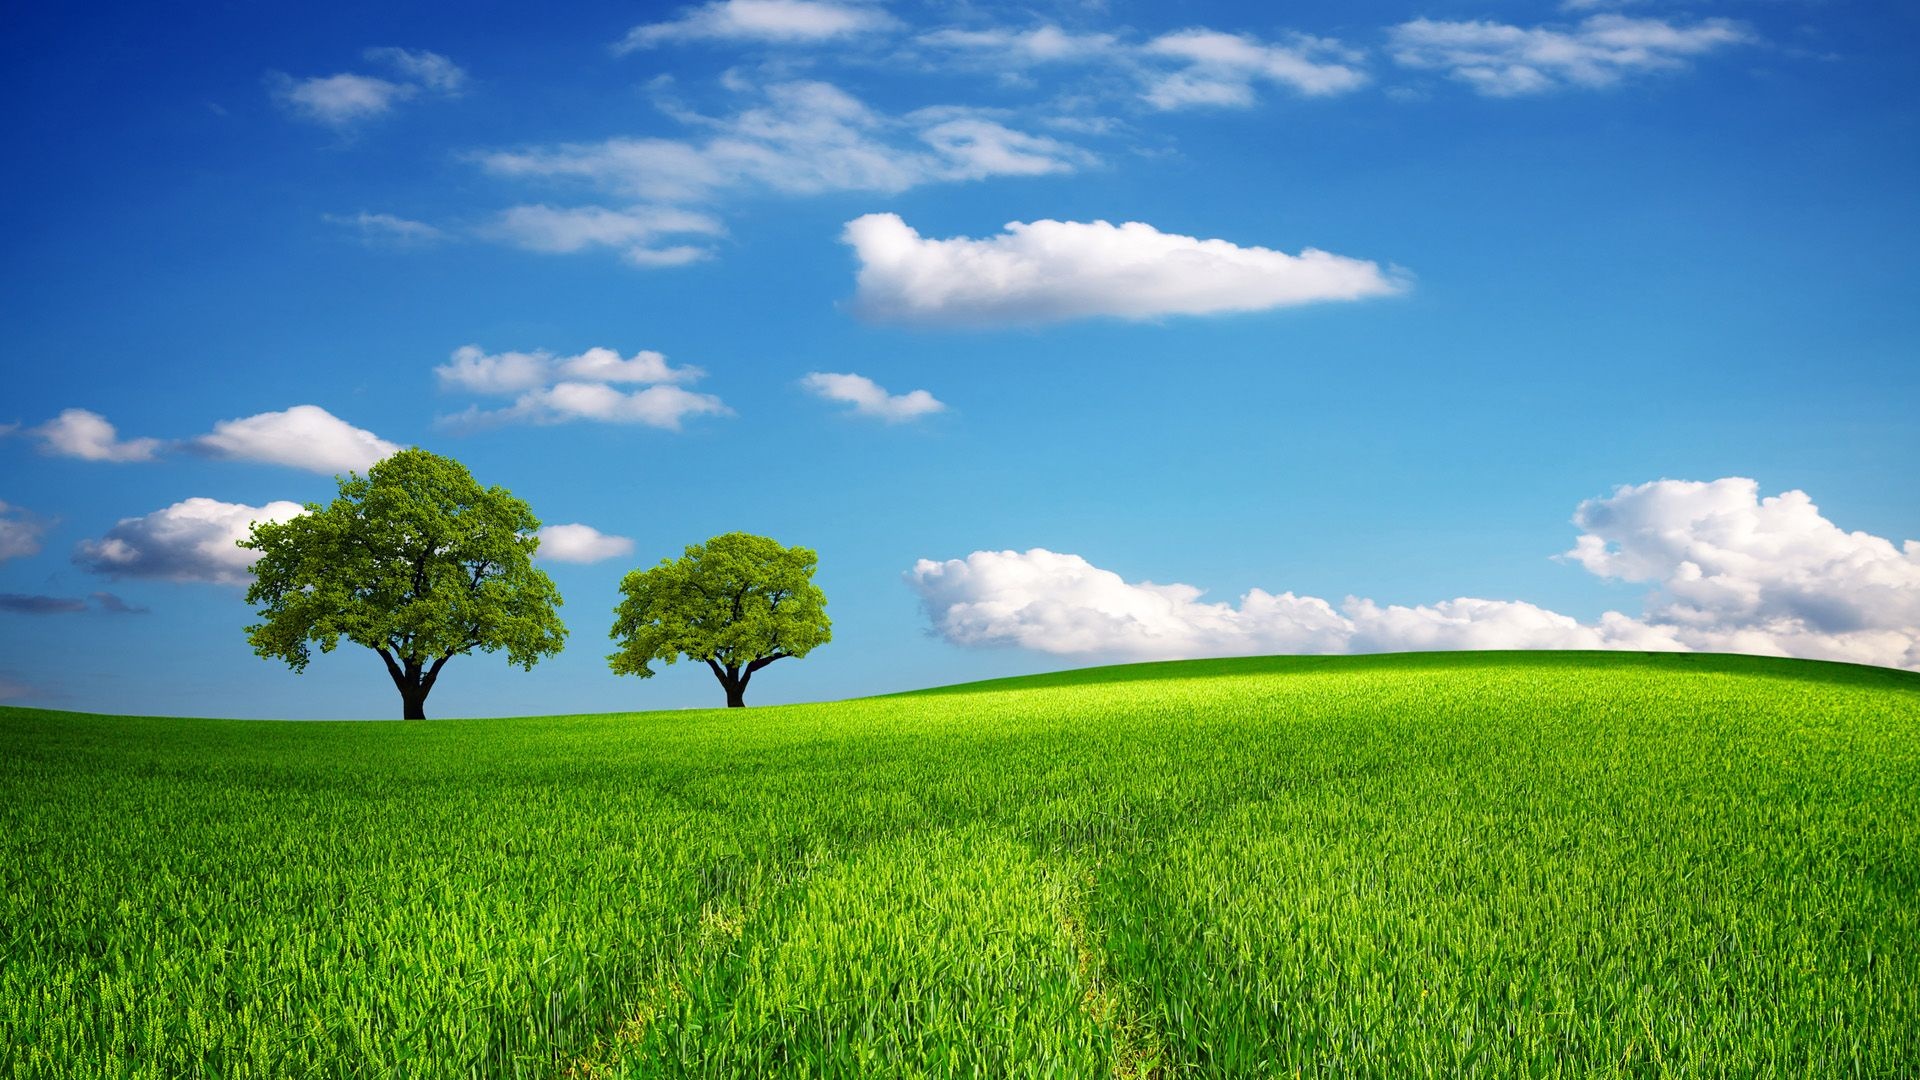 Grass and Sky: Green pastures, Open space, Out-of-doors, Path, An extensive area of land. 1920x1080 Full HD Wallpaper.